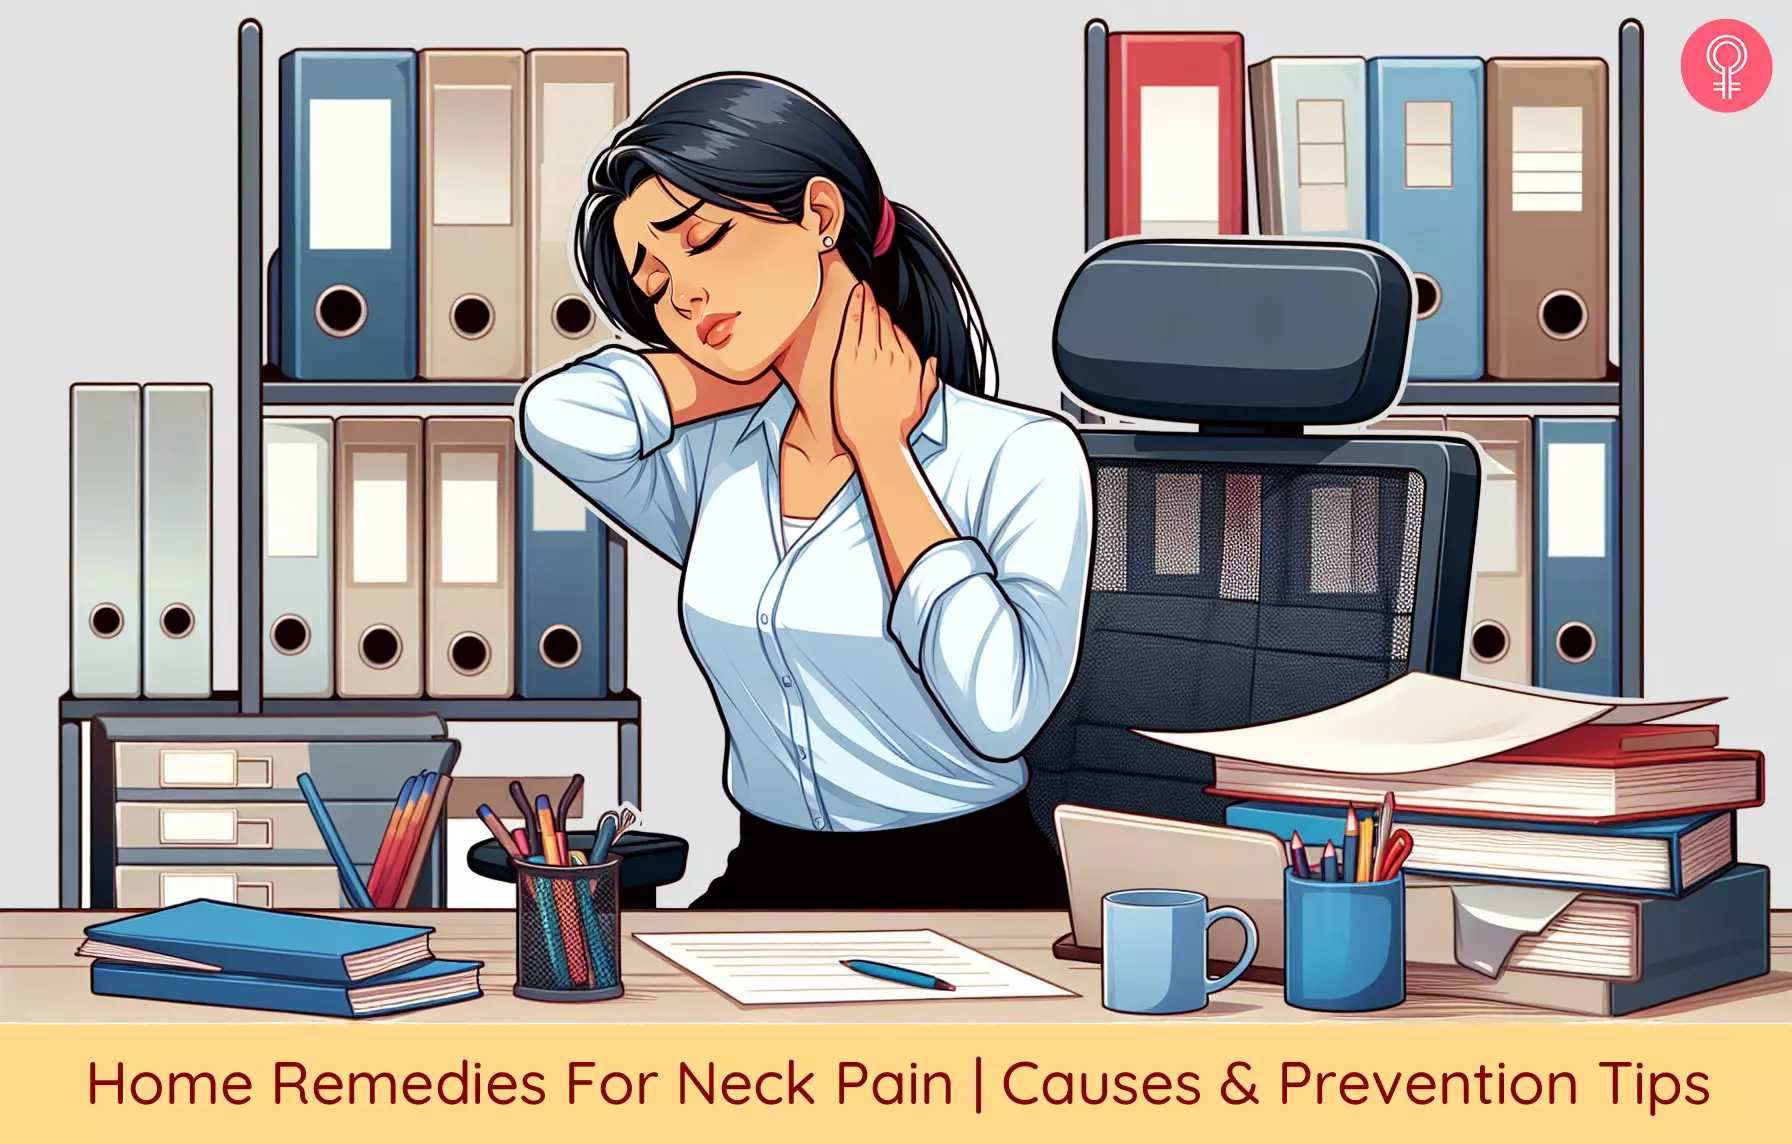 11 Home Remedies For Neck Pain | Causes & Prevention Tips